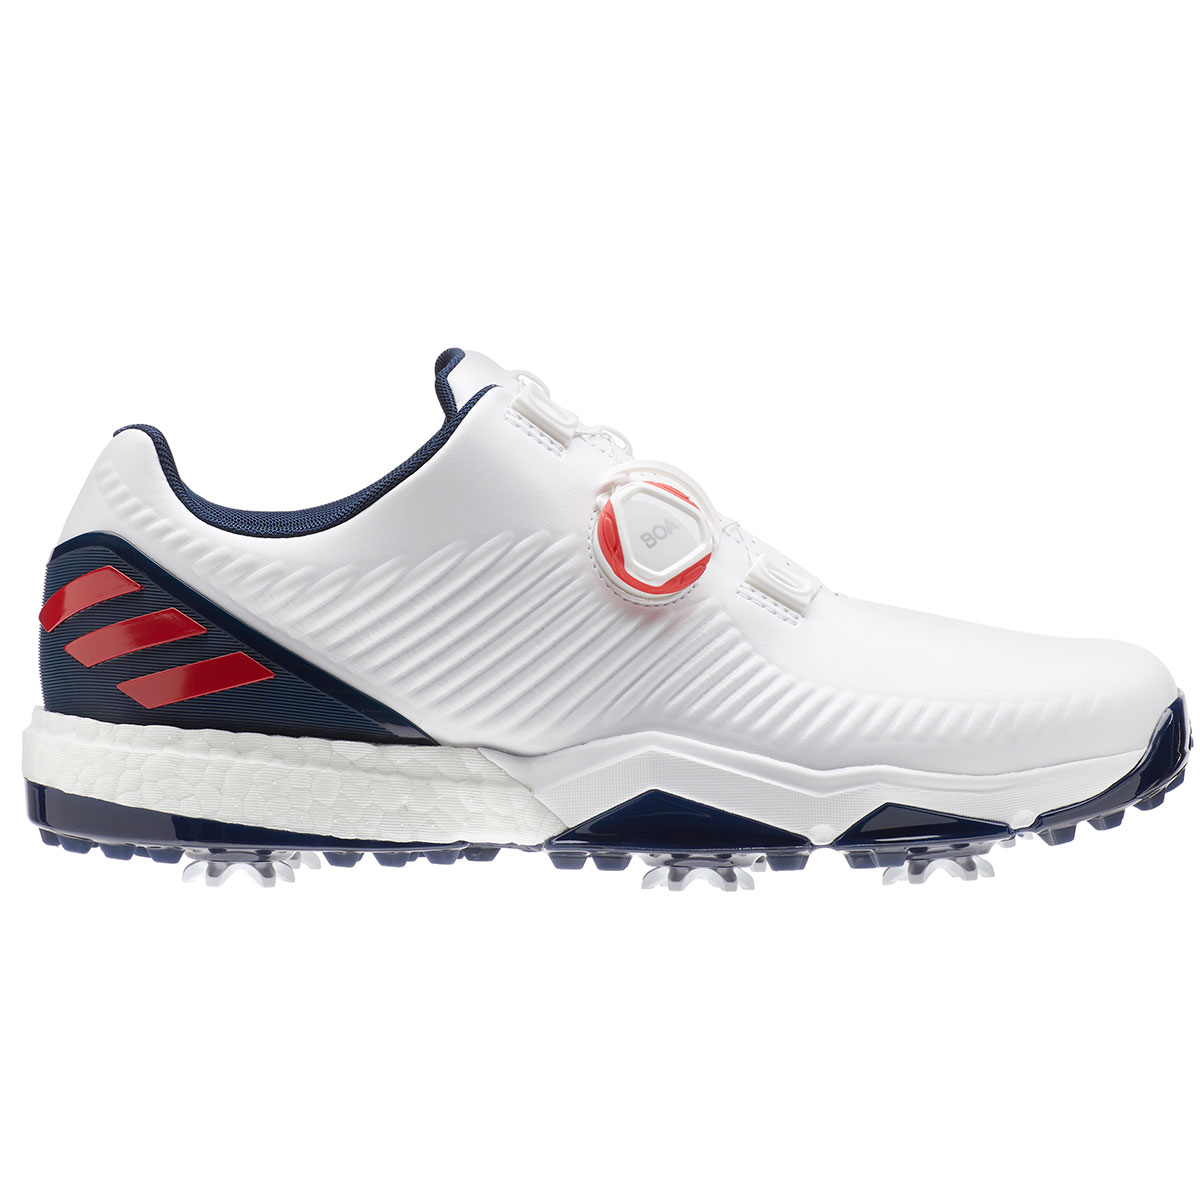 adidas Golf Adipower Forged BOA Shoes Online Golf